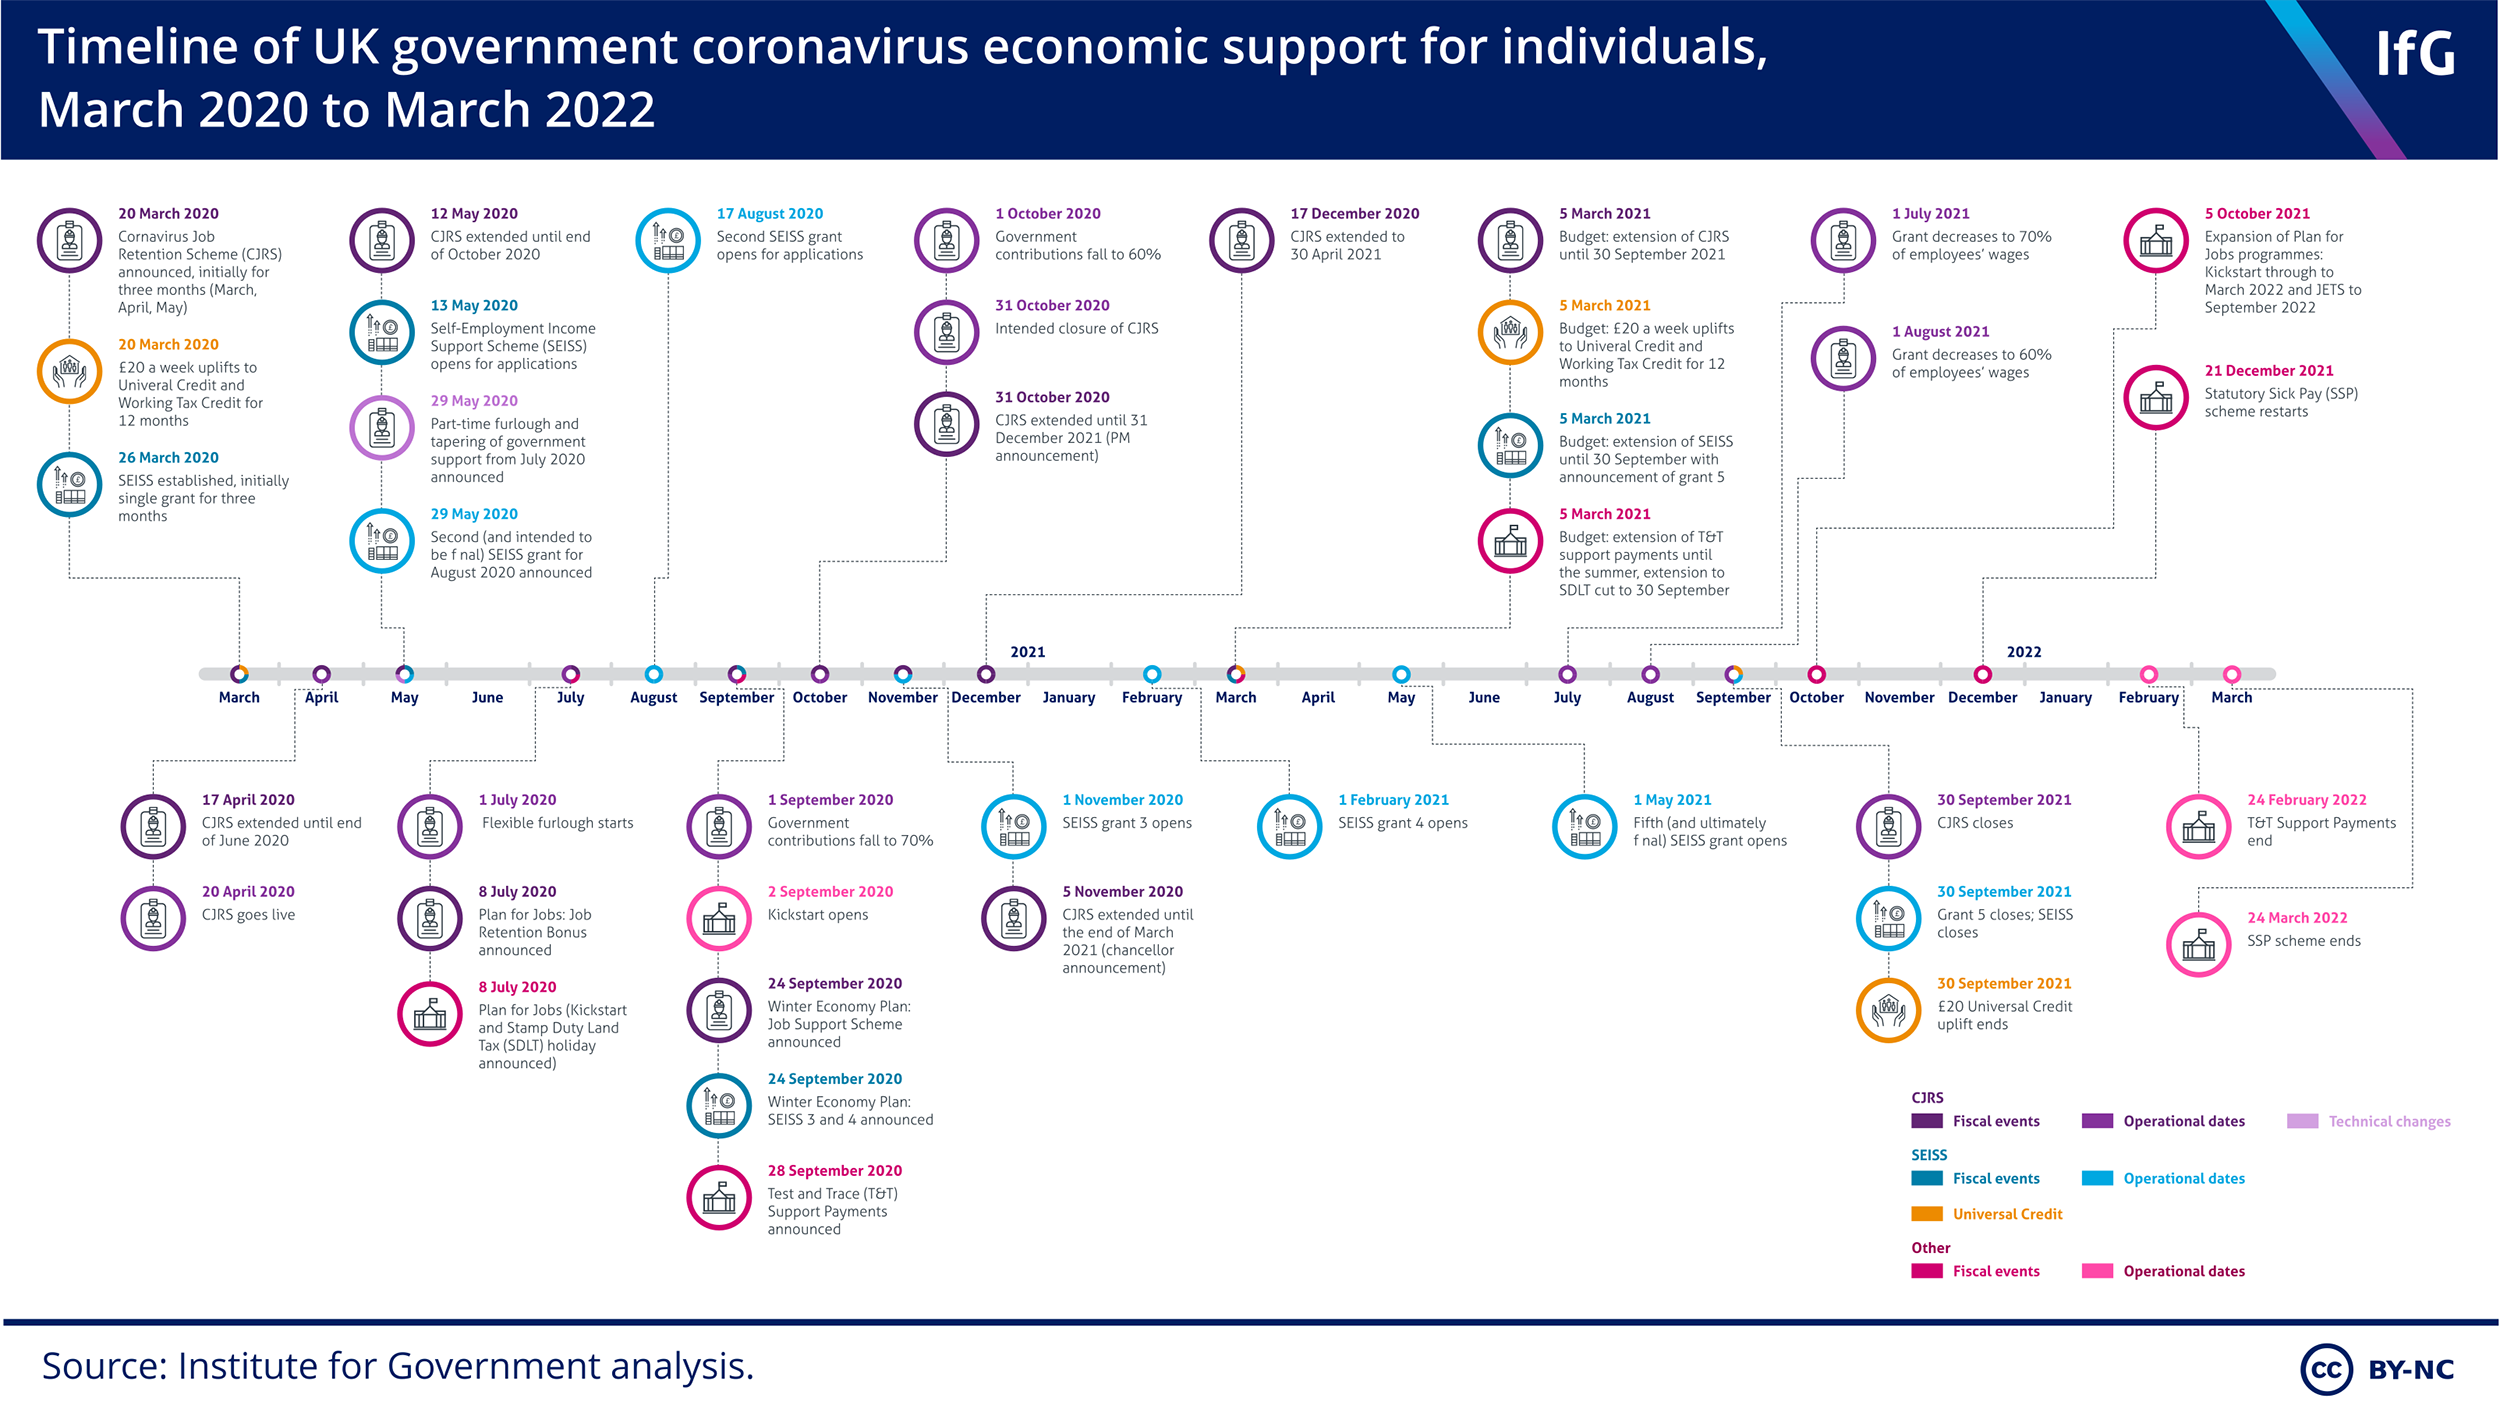 Timeline of UK government coronavirus economic support for individuals, March 2020 to March 2022